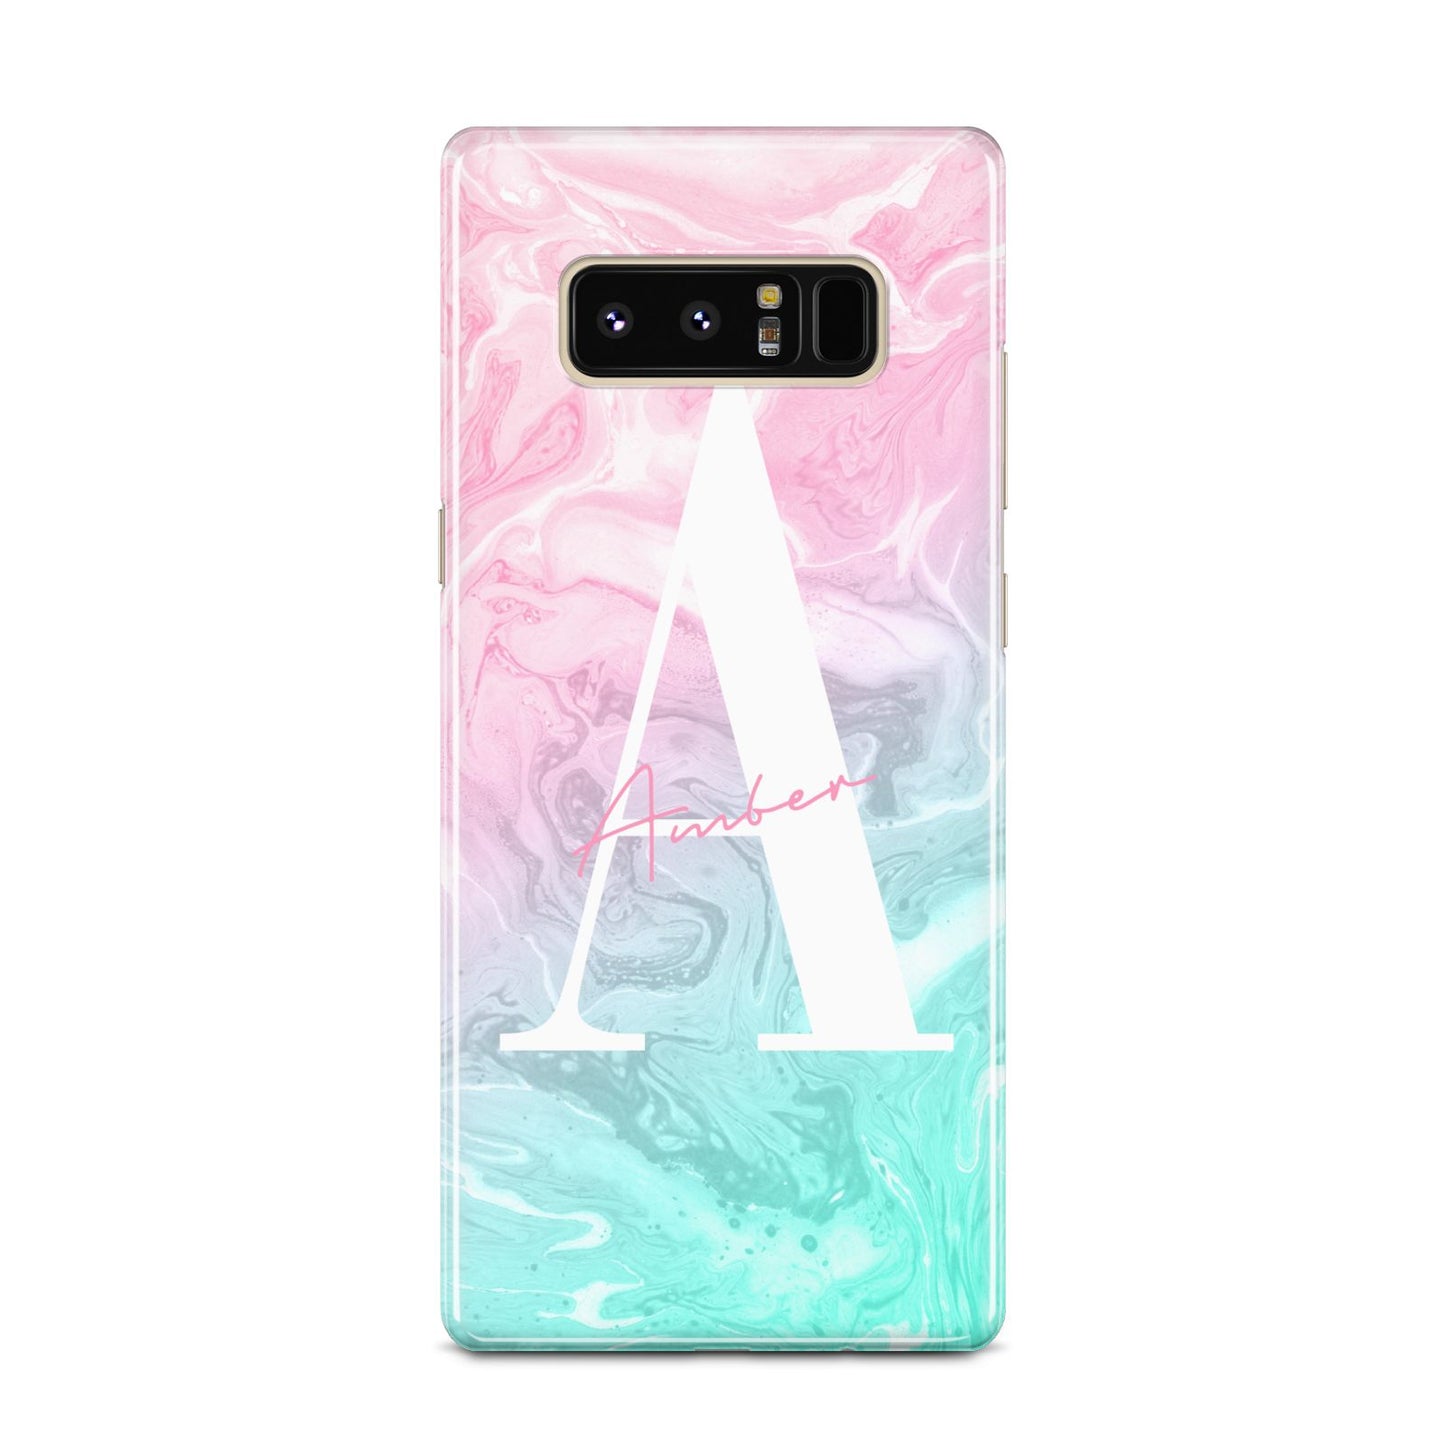 Monogrammed Pink Turquoise Pastel Marble Samsung Galaxy Note 8 Case